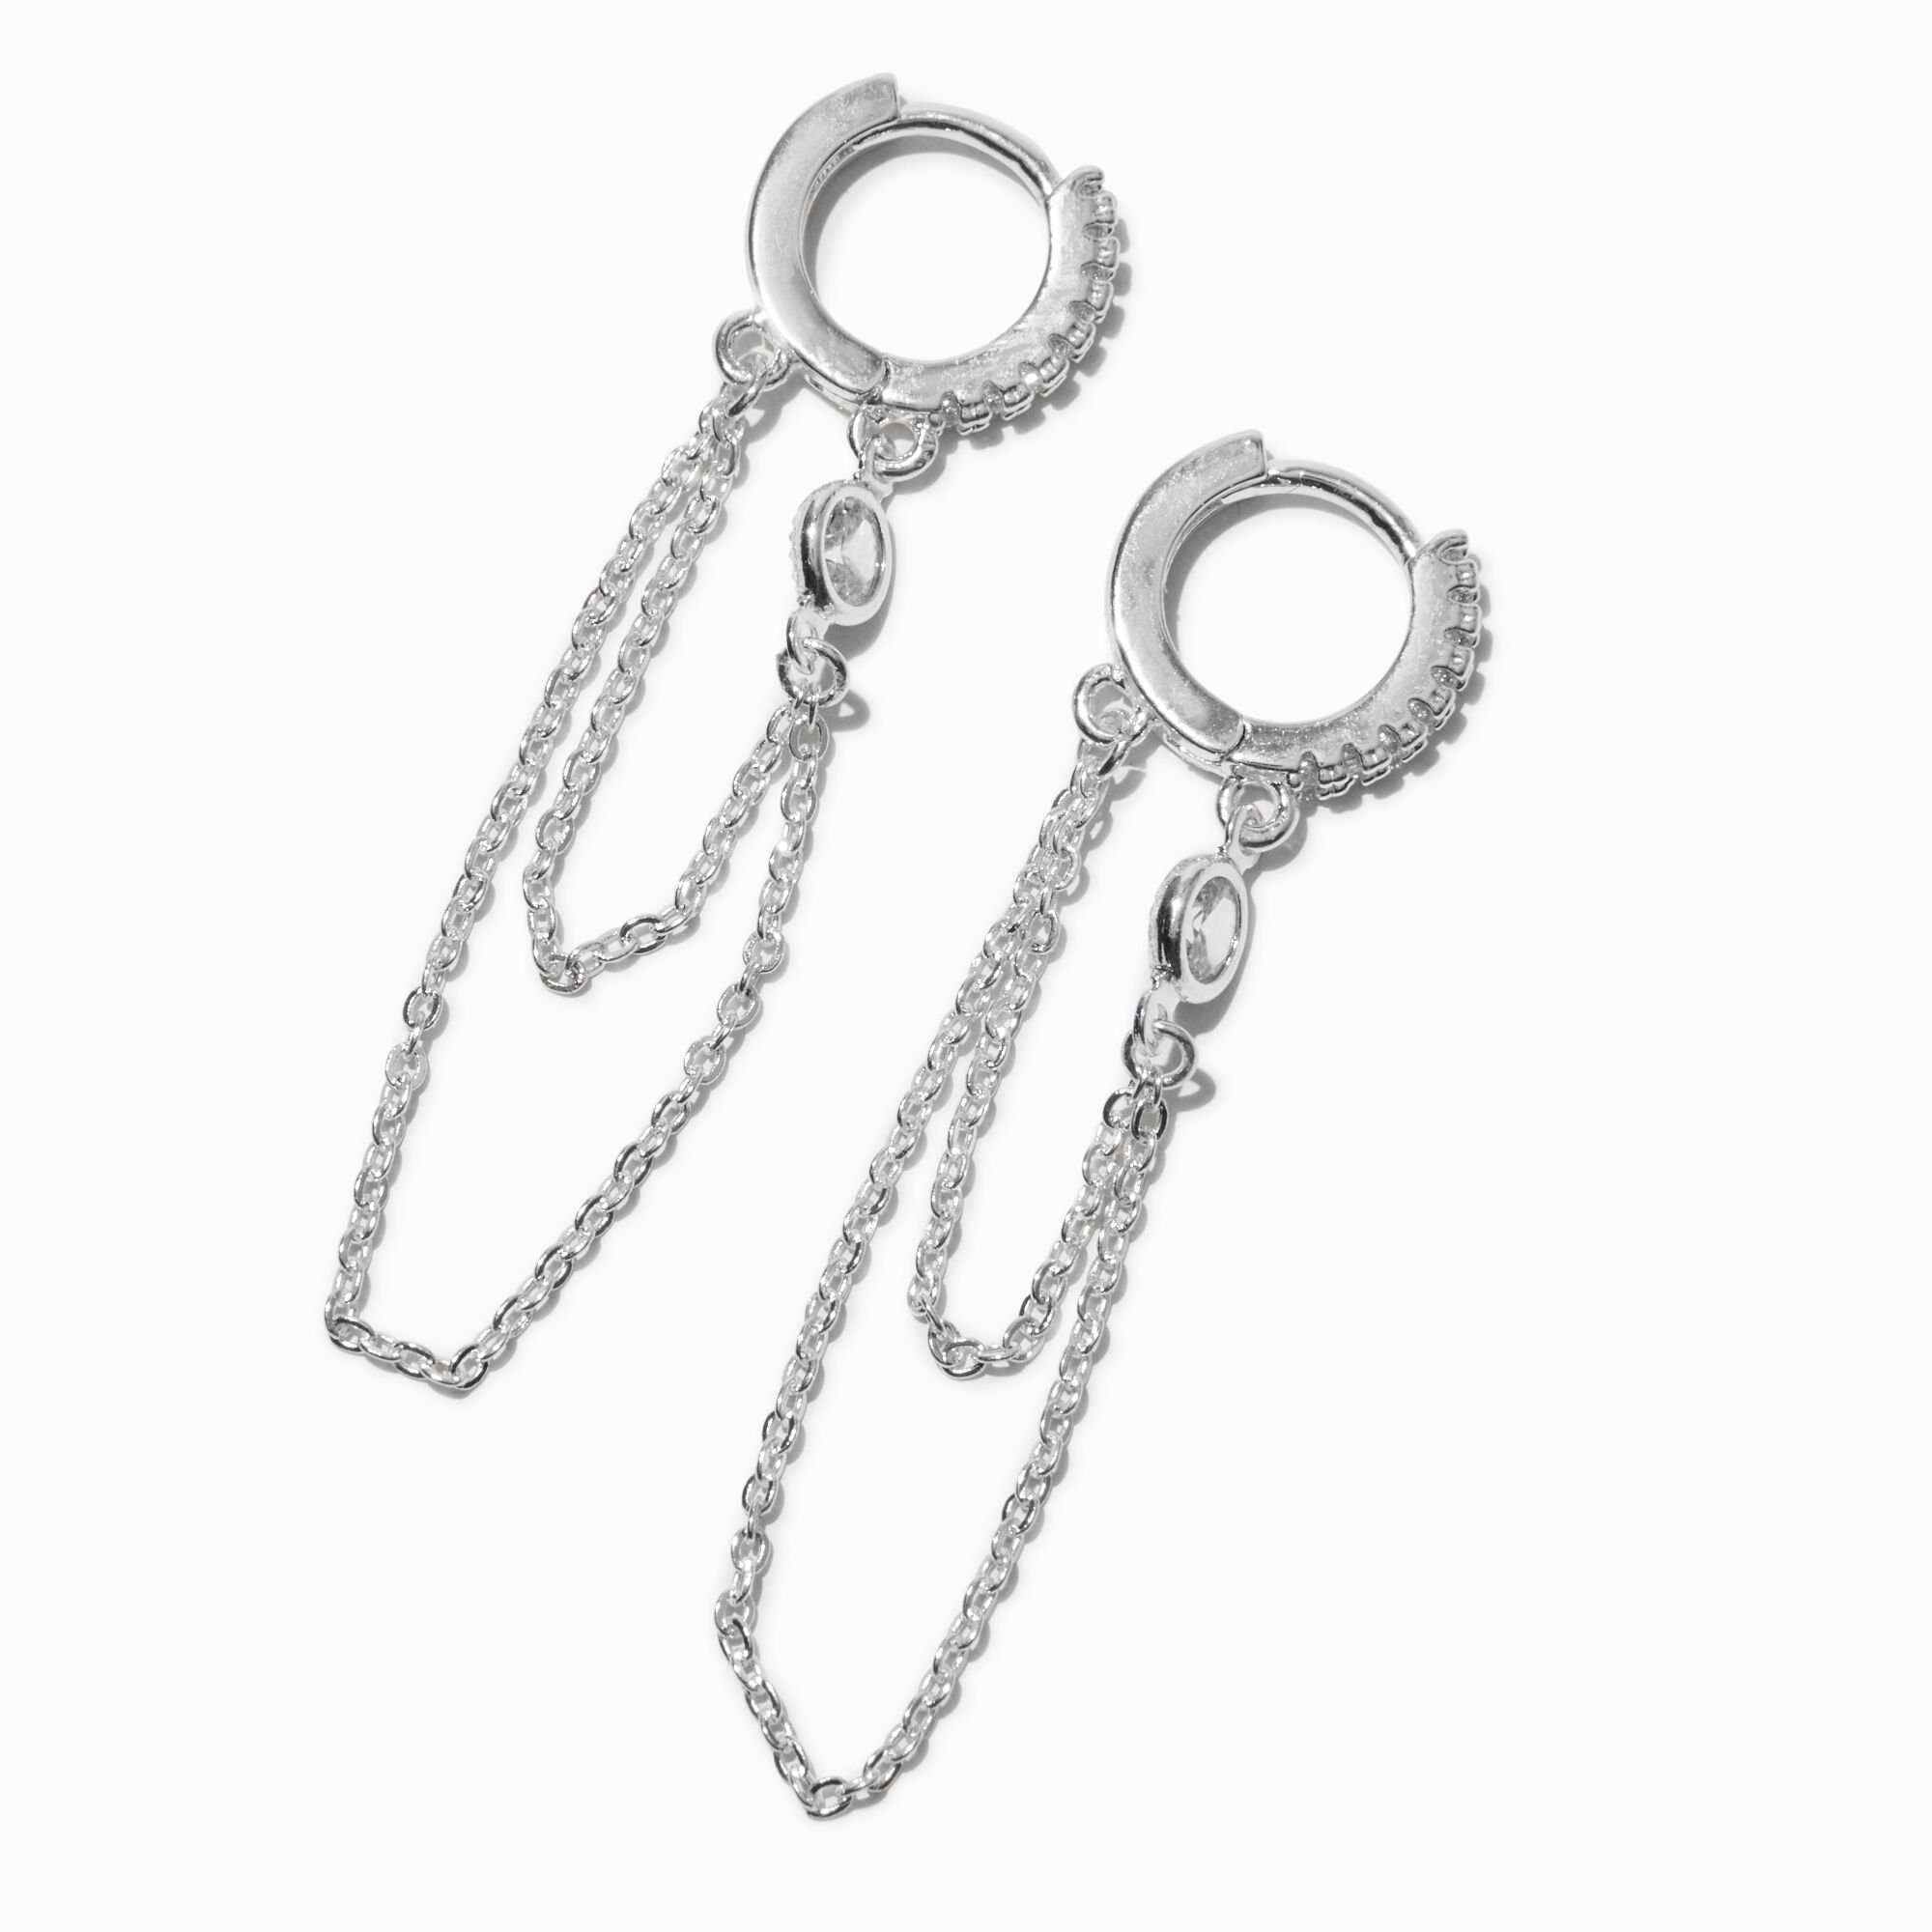 View Claires Tone Cubic Zirconia 10MM Huggie Hoop Chain Earrings Silver information